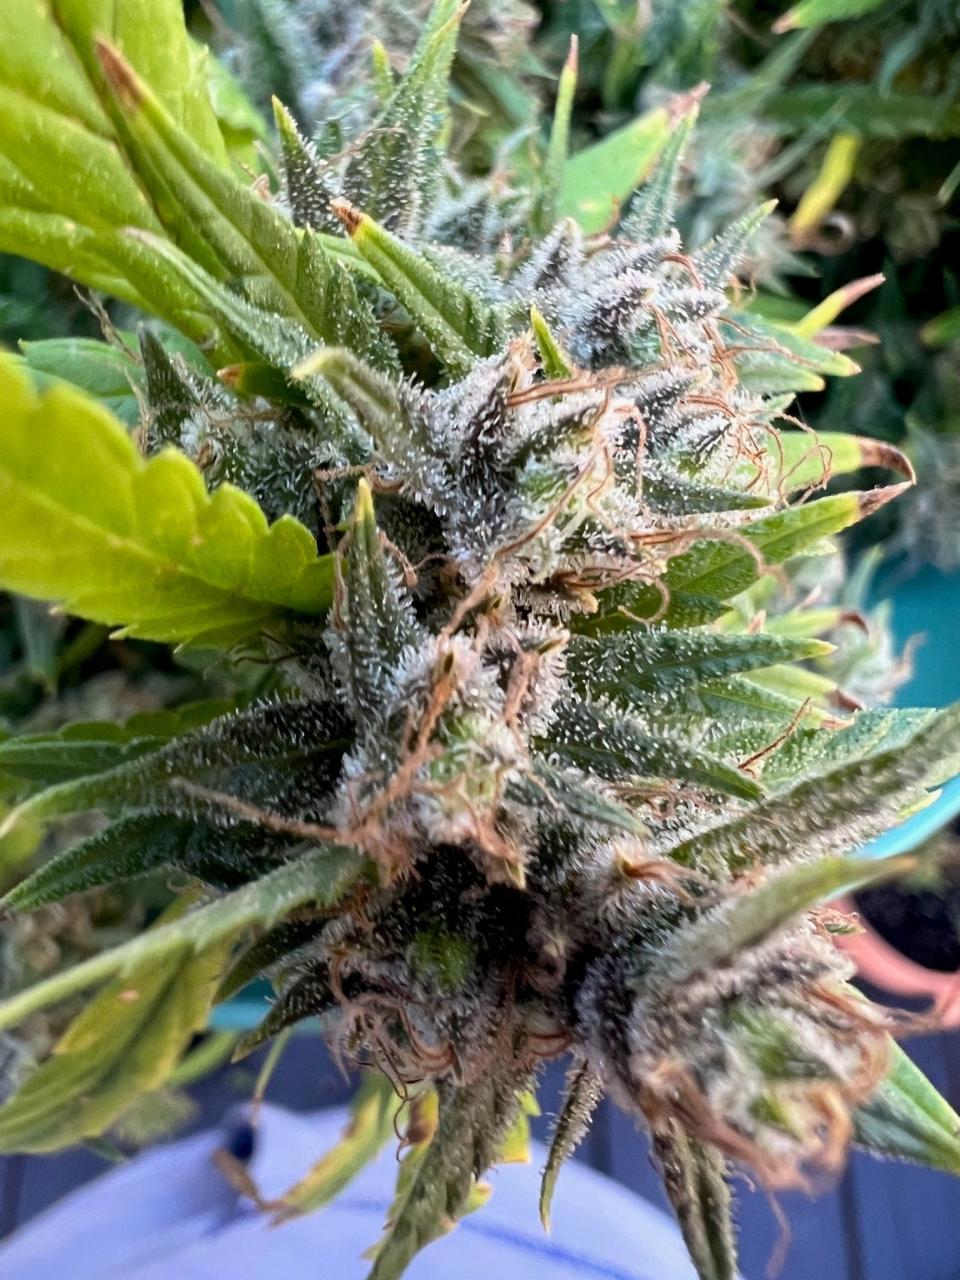 A close-up photo of a Sativa marijuana plant grown by Cecil Cornish. Cornish planted his first marijuana plants in February 2022 and harvested about four ounces in October 2022.